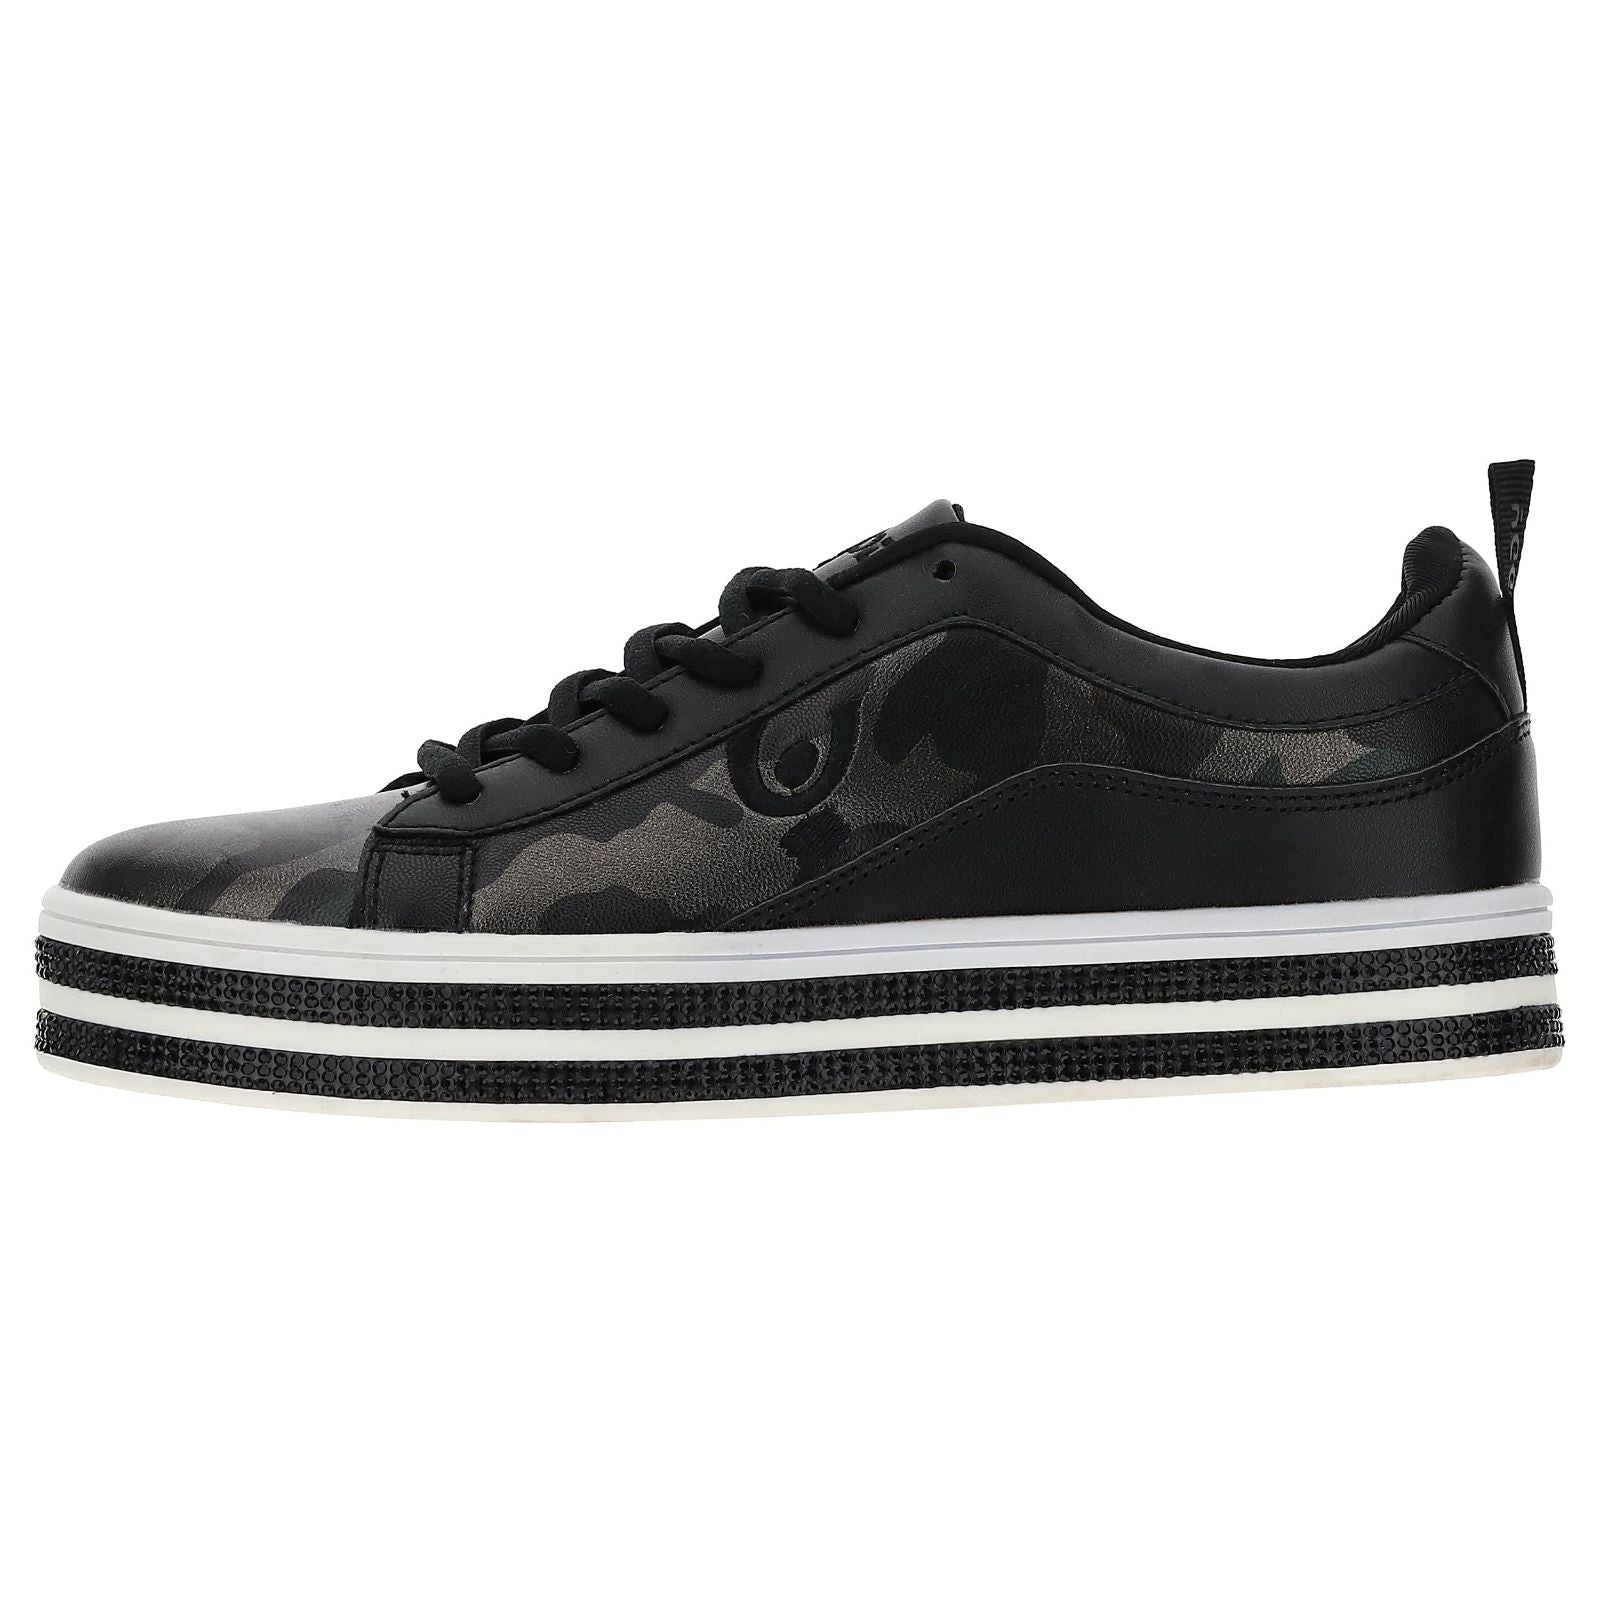 Women’s Camouflage Trainers - Black 2